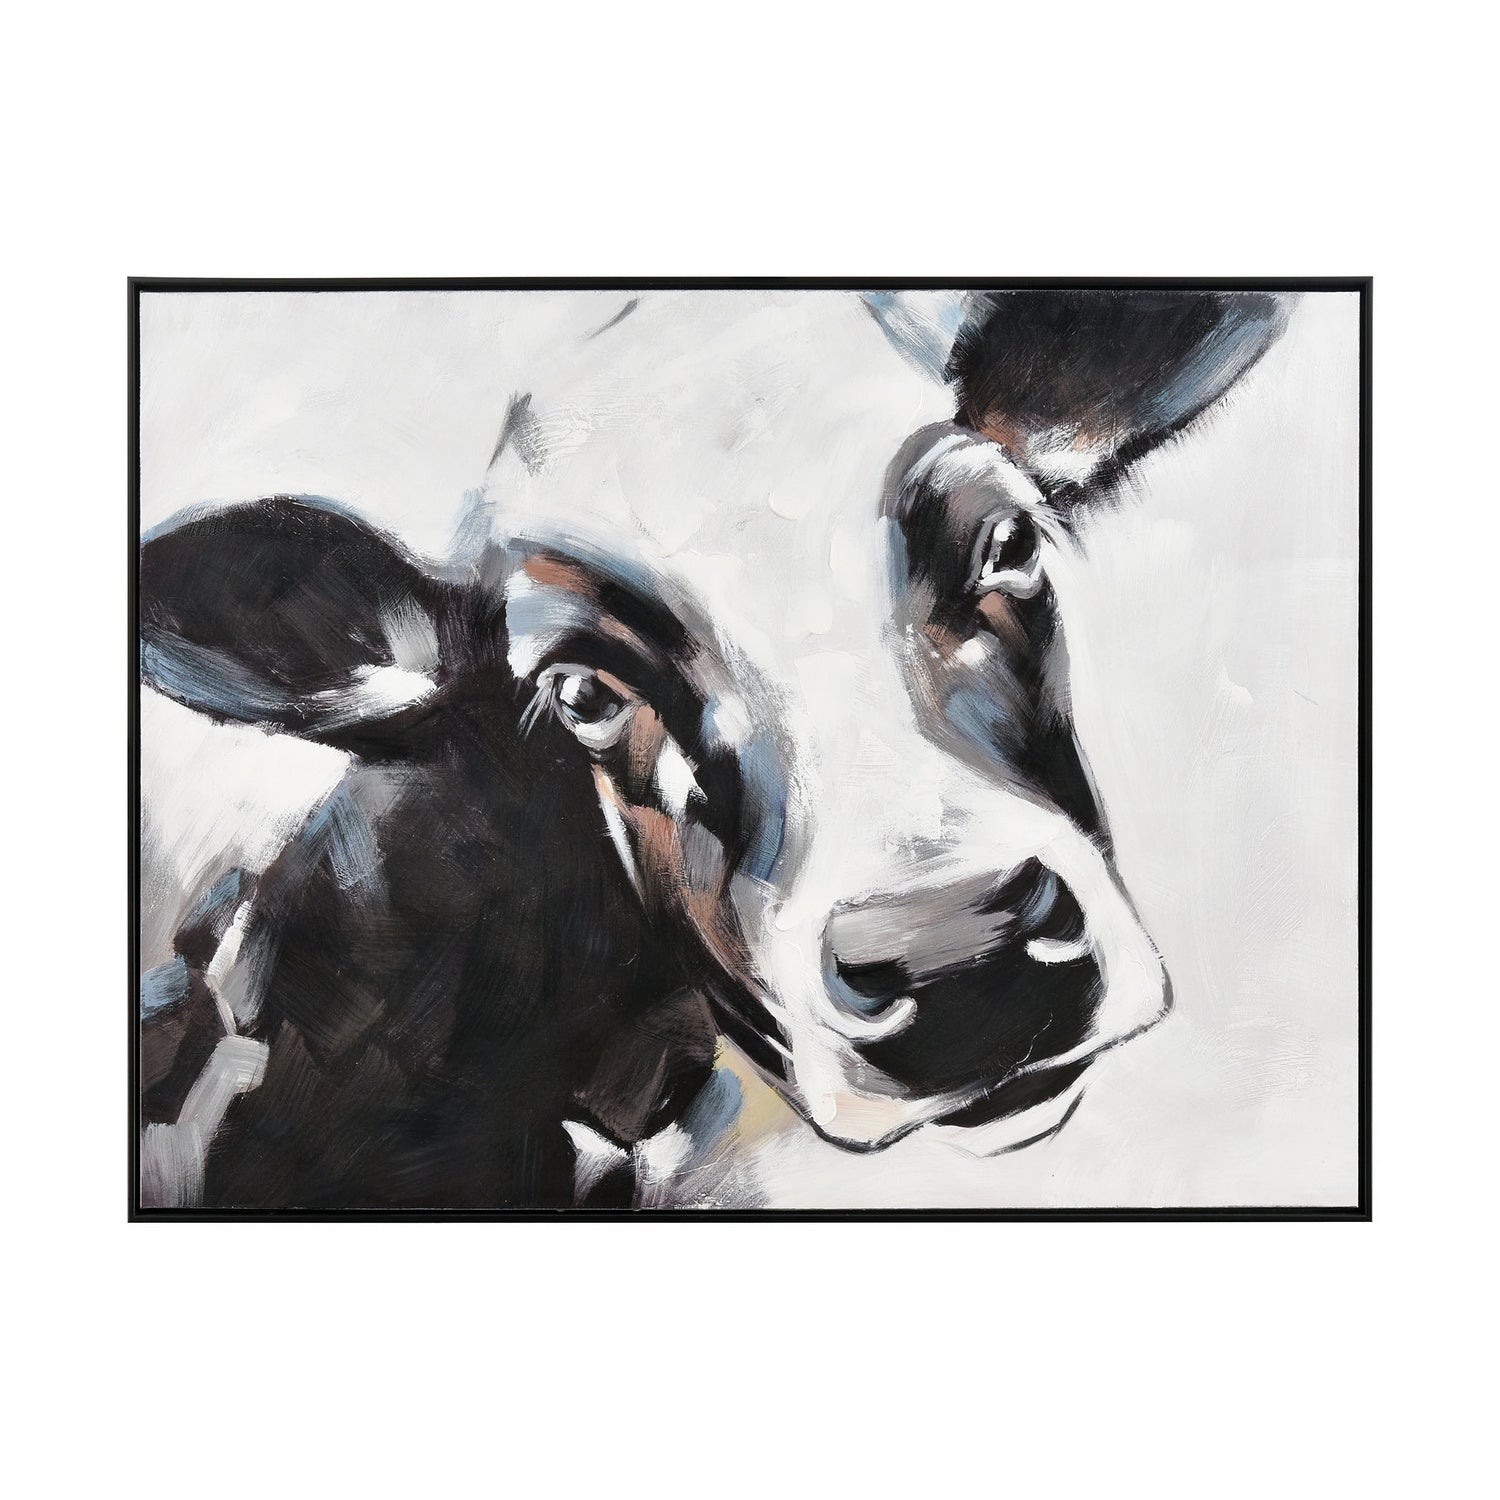 ELK Home - S0016-8146 - Wall Art - Lucy the Cow - White